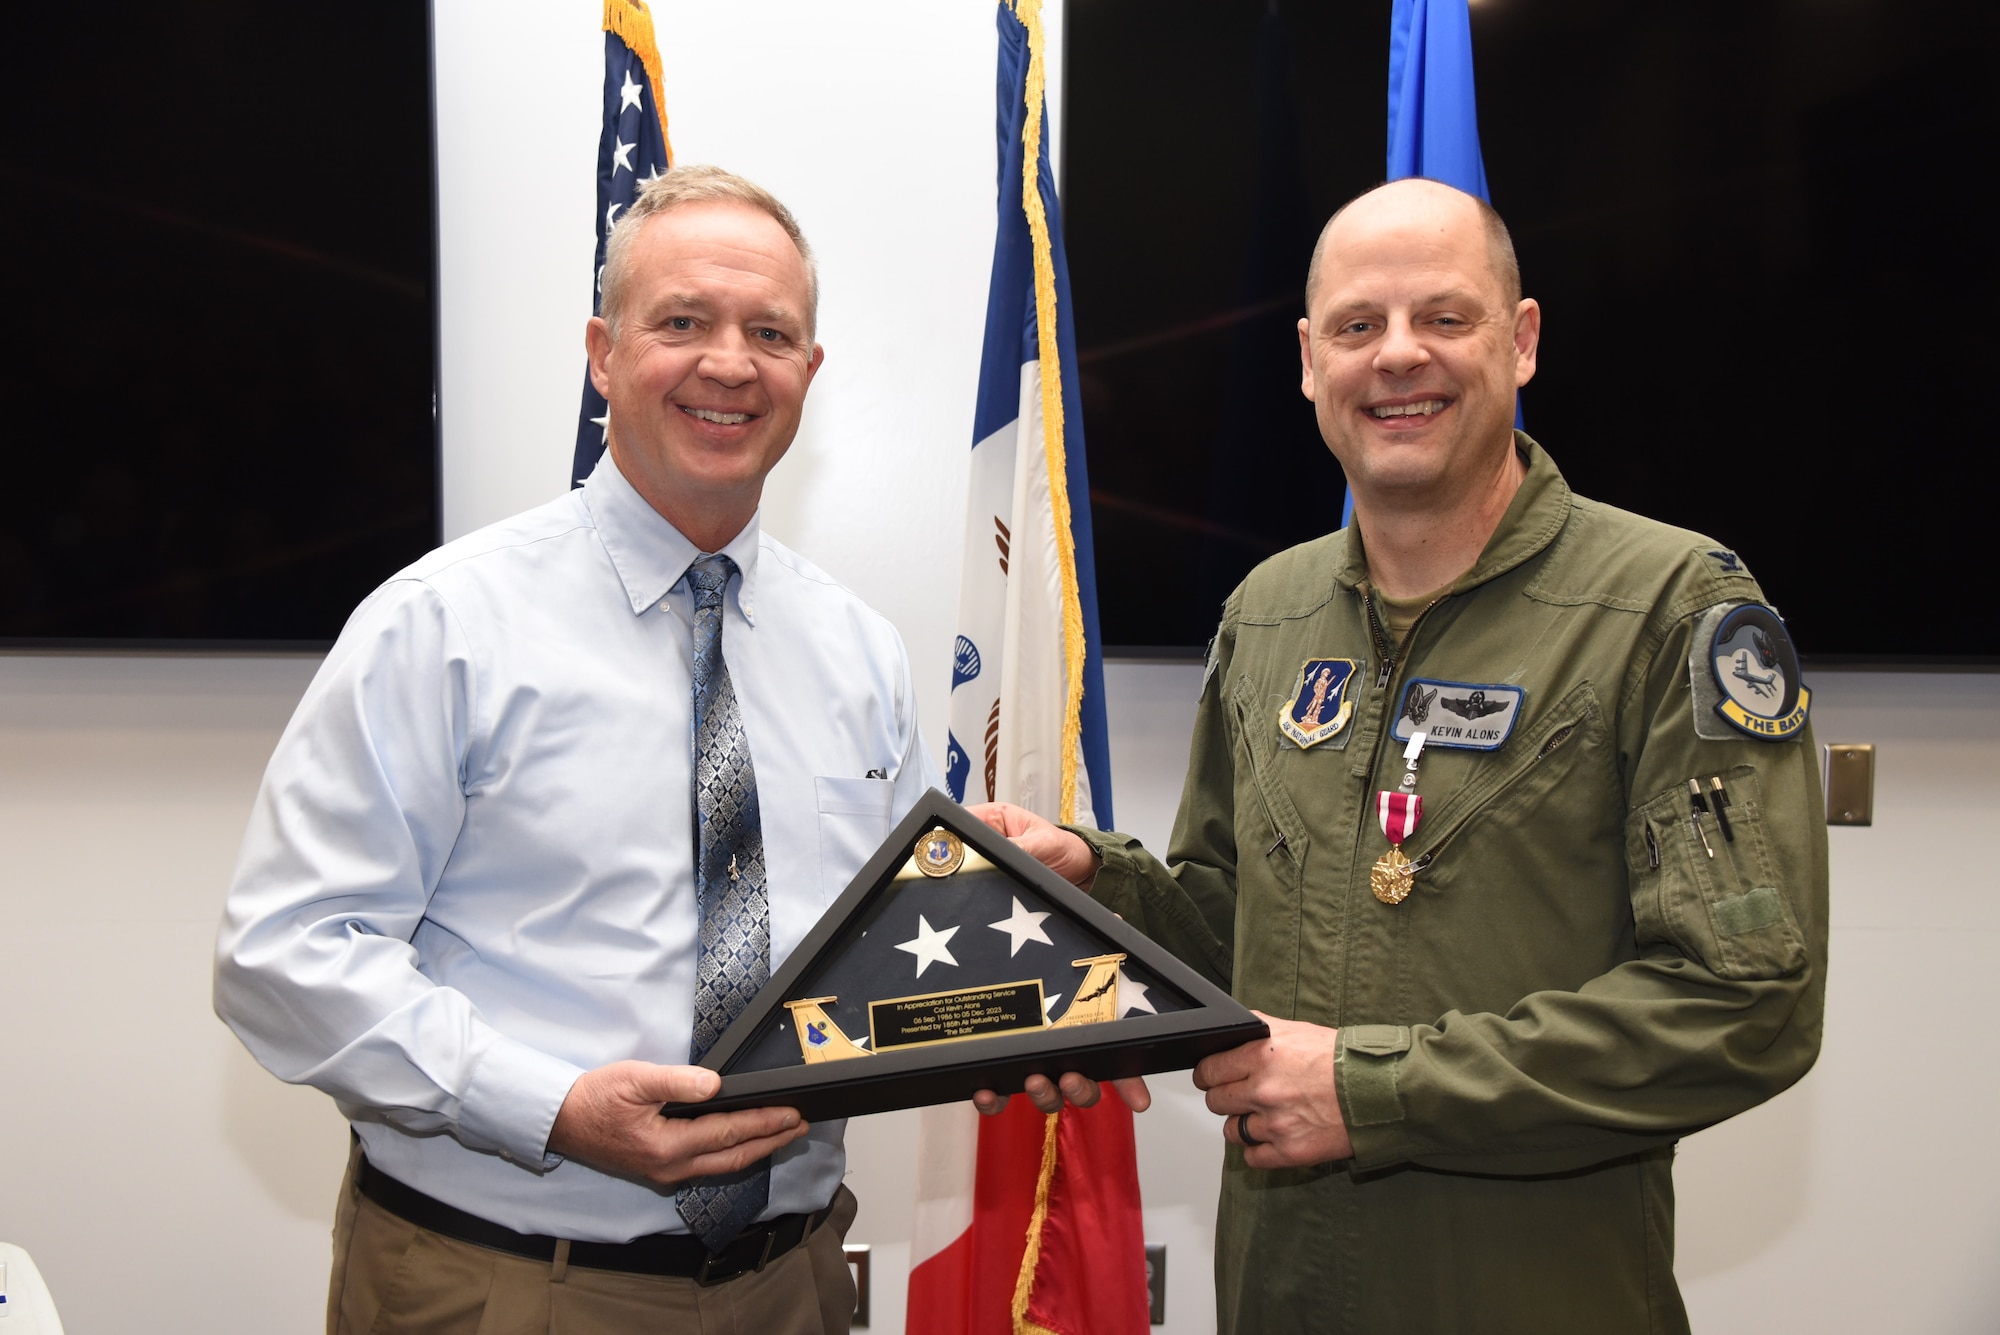 U.S. Air National Guard Col. Kevin Alons, Director of Operations for Air for the Iowa Air National Guard, right, accepts a retirement flag from retired Brig. Gen. Lawrence Christensen, former Chief of Staff of the Iowa Air National Guard, left